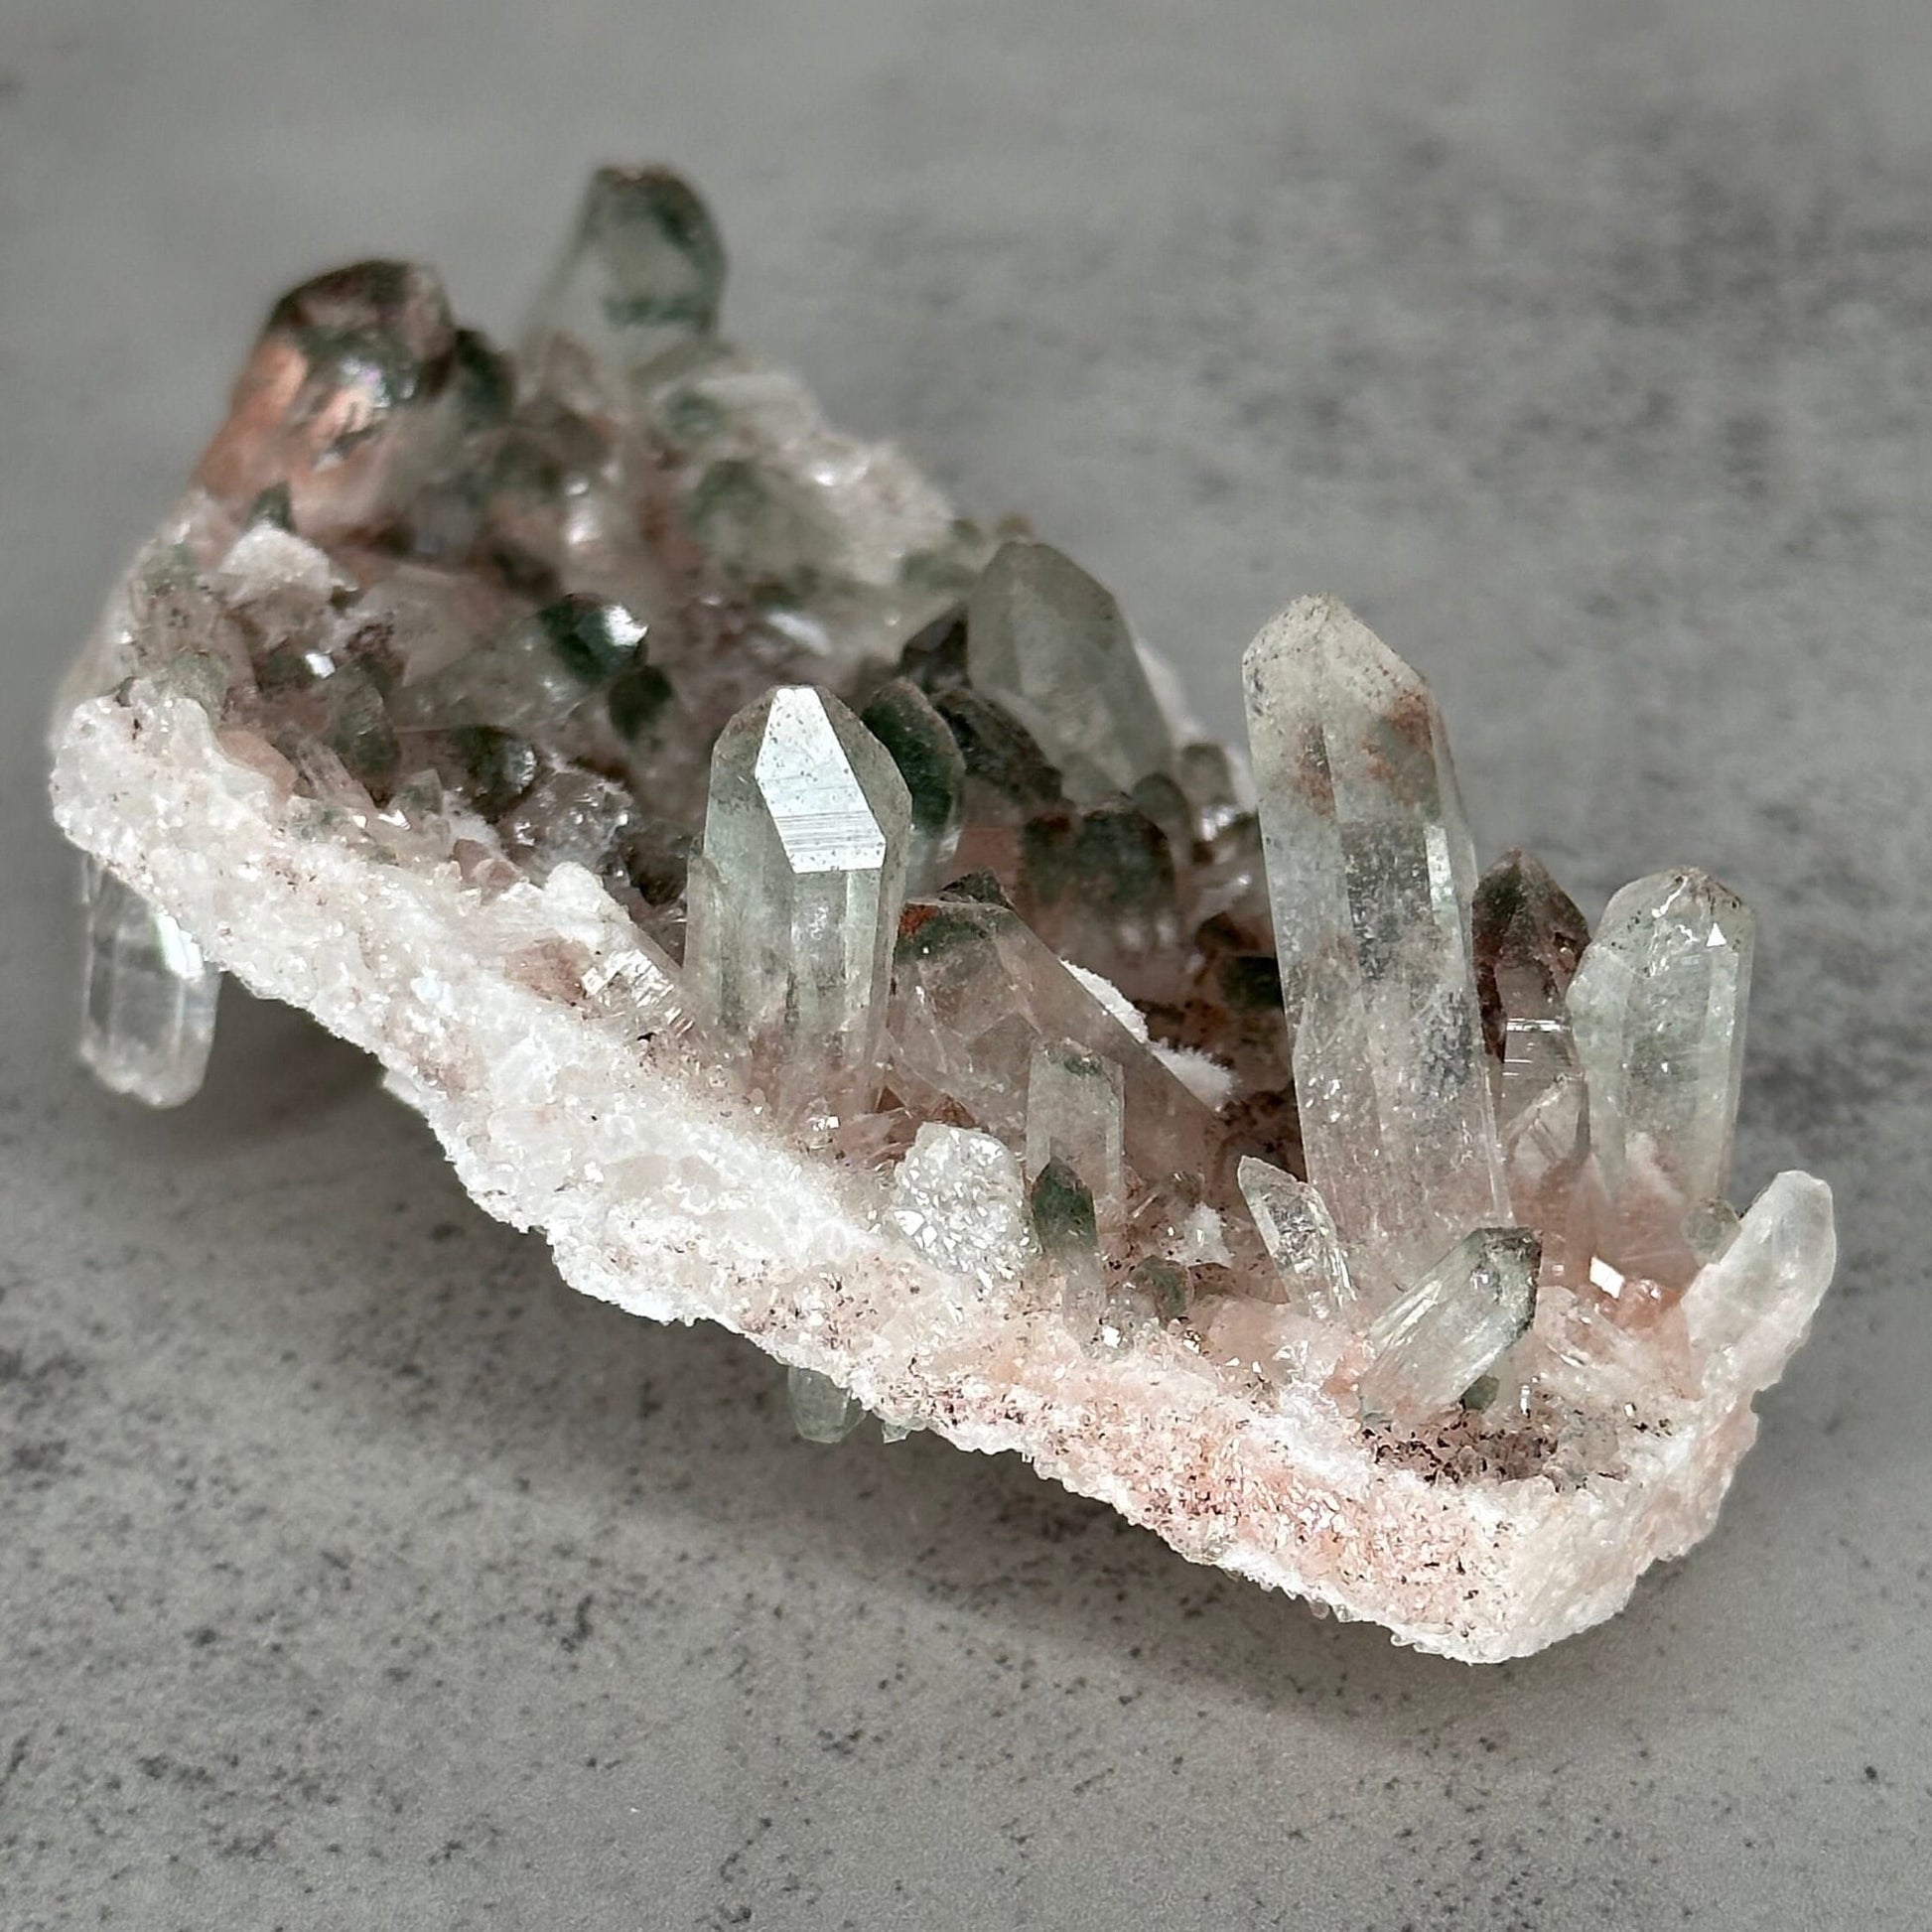 Beautiful Pink Himalayan Samadhi Quartz With Chlorite High-Quality Genuine Specimen Crystal from India | Tucson Gem Show Exclusive